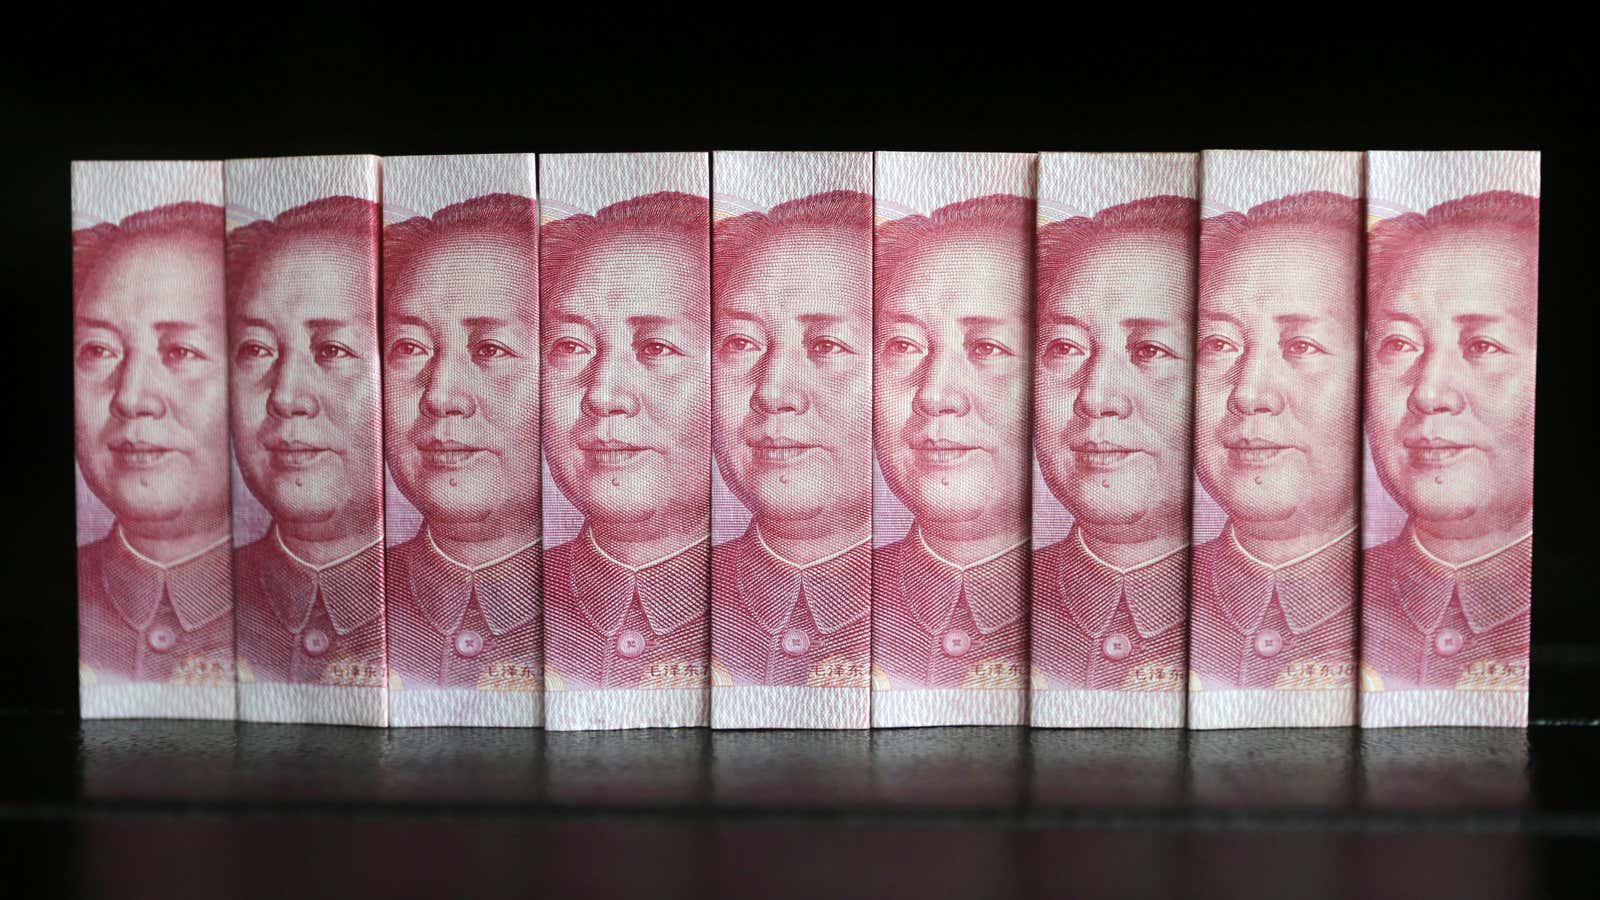 An obscure derivative is costing investors billions as China’s currency falls